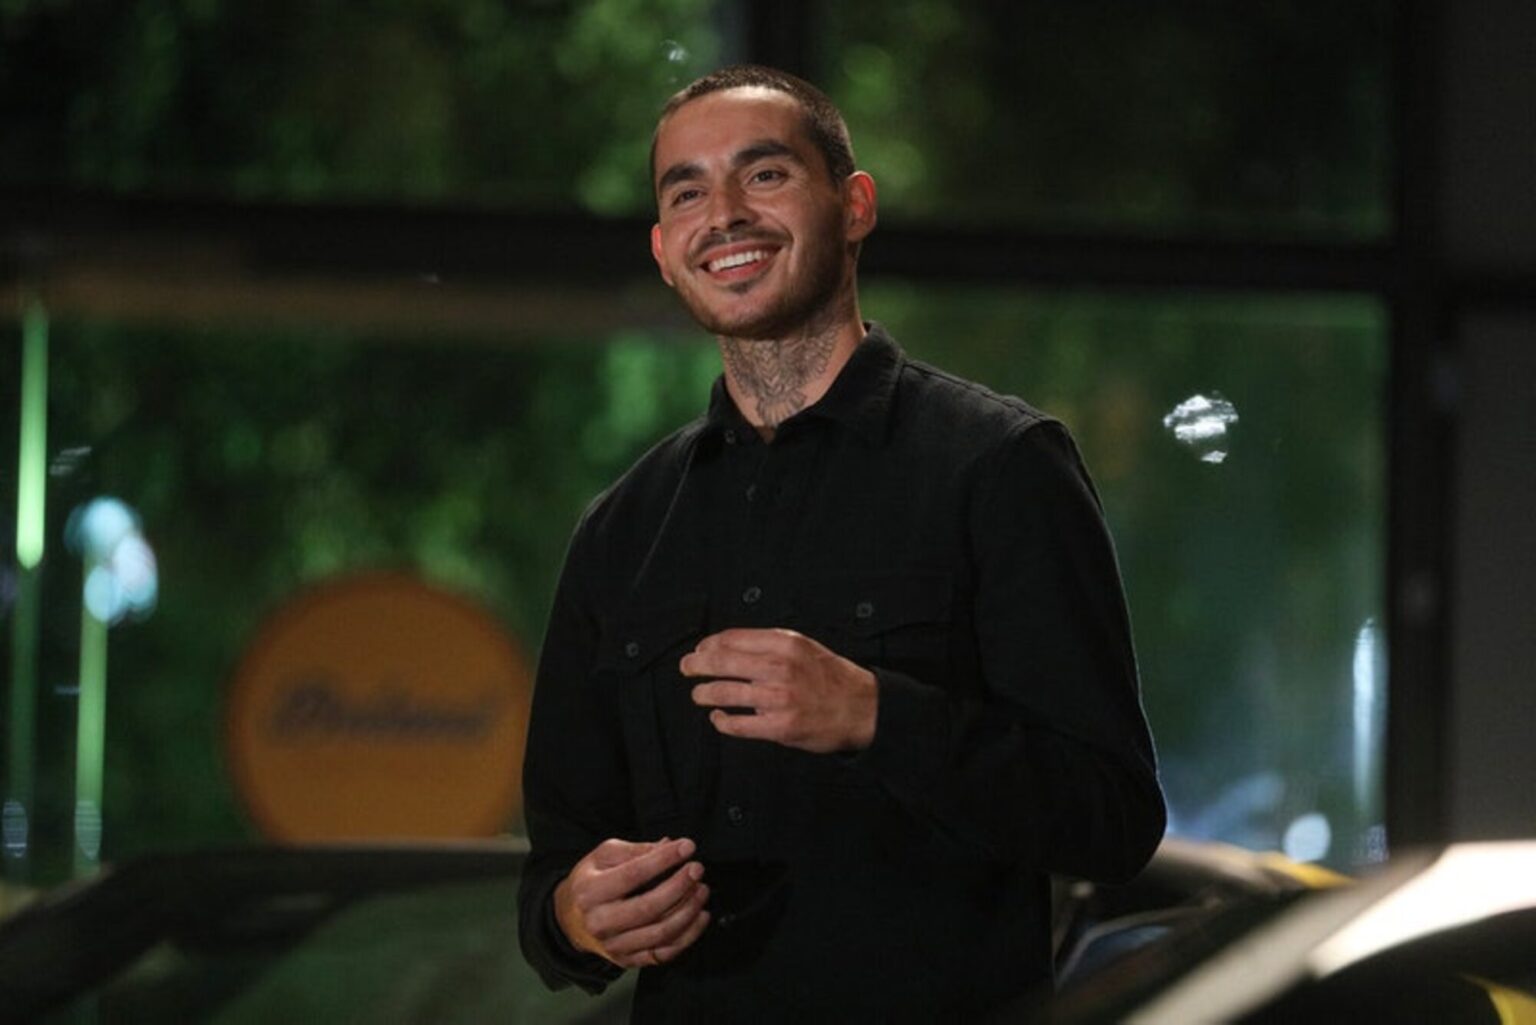 Missing Rio from 'Good Girls'? If you want to see Manny Montana's stunning smile again, check out these shows he stars in.